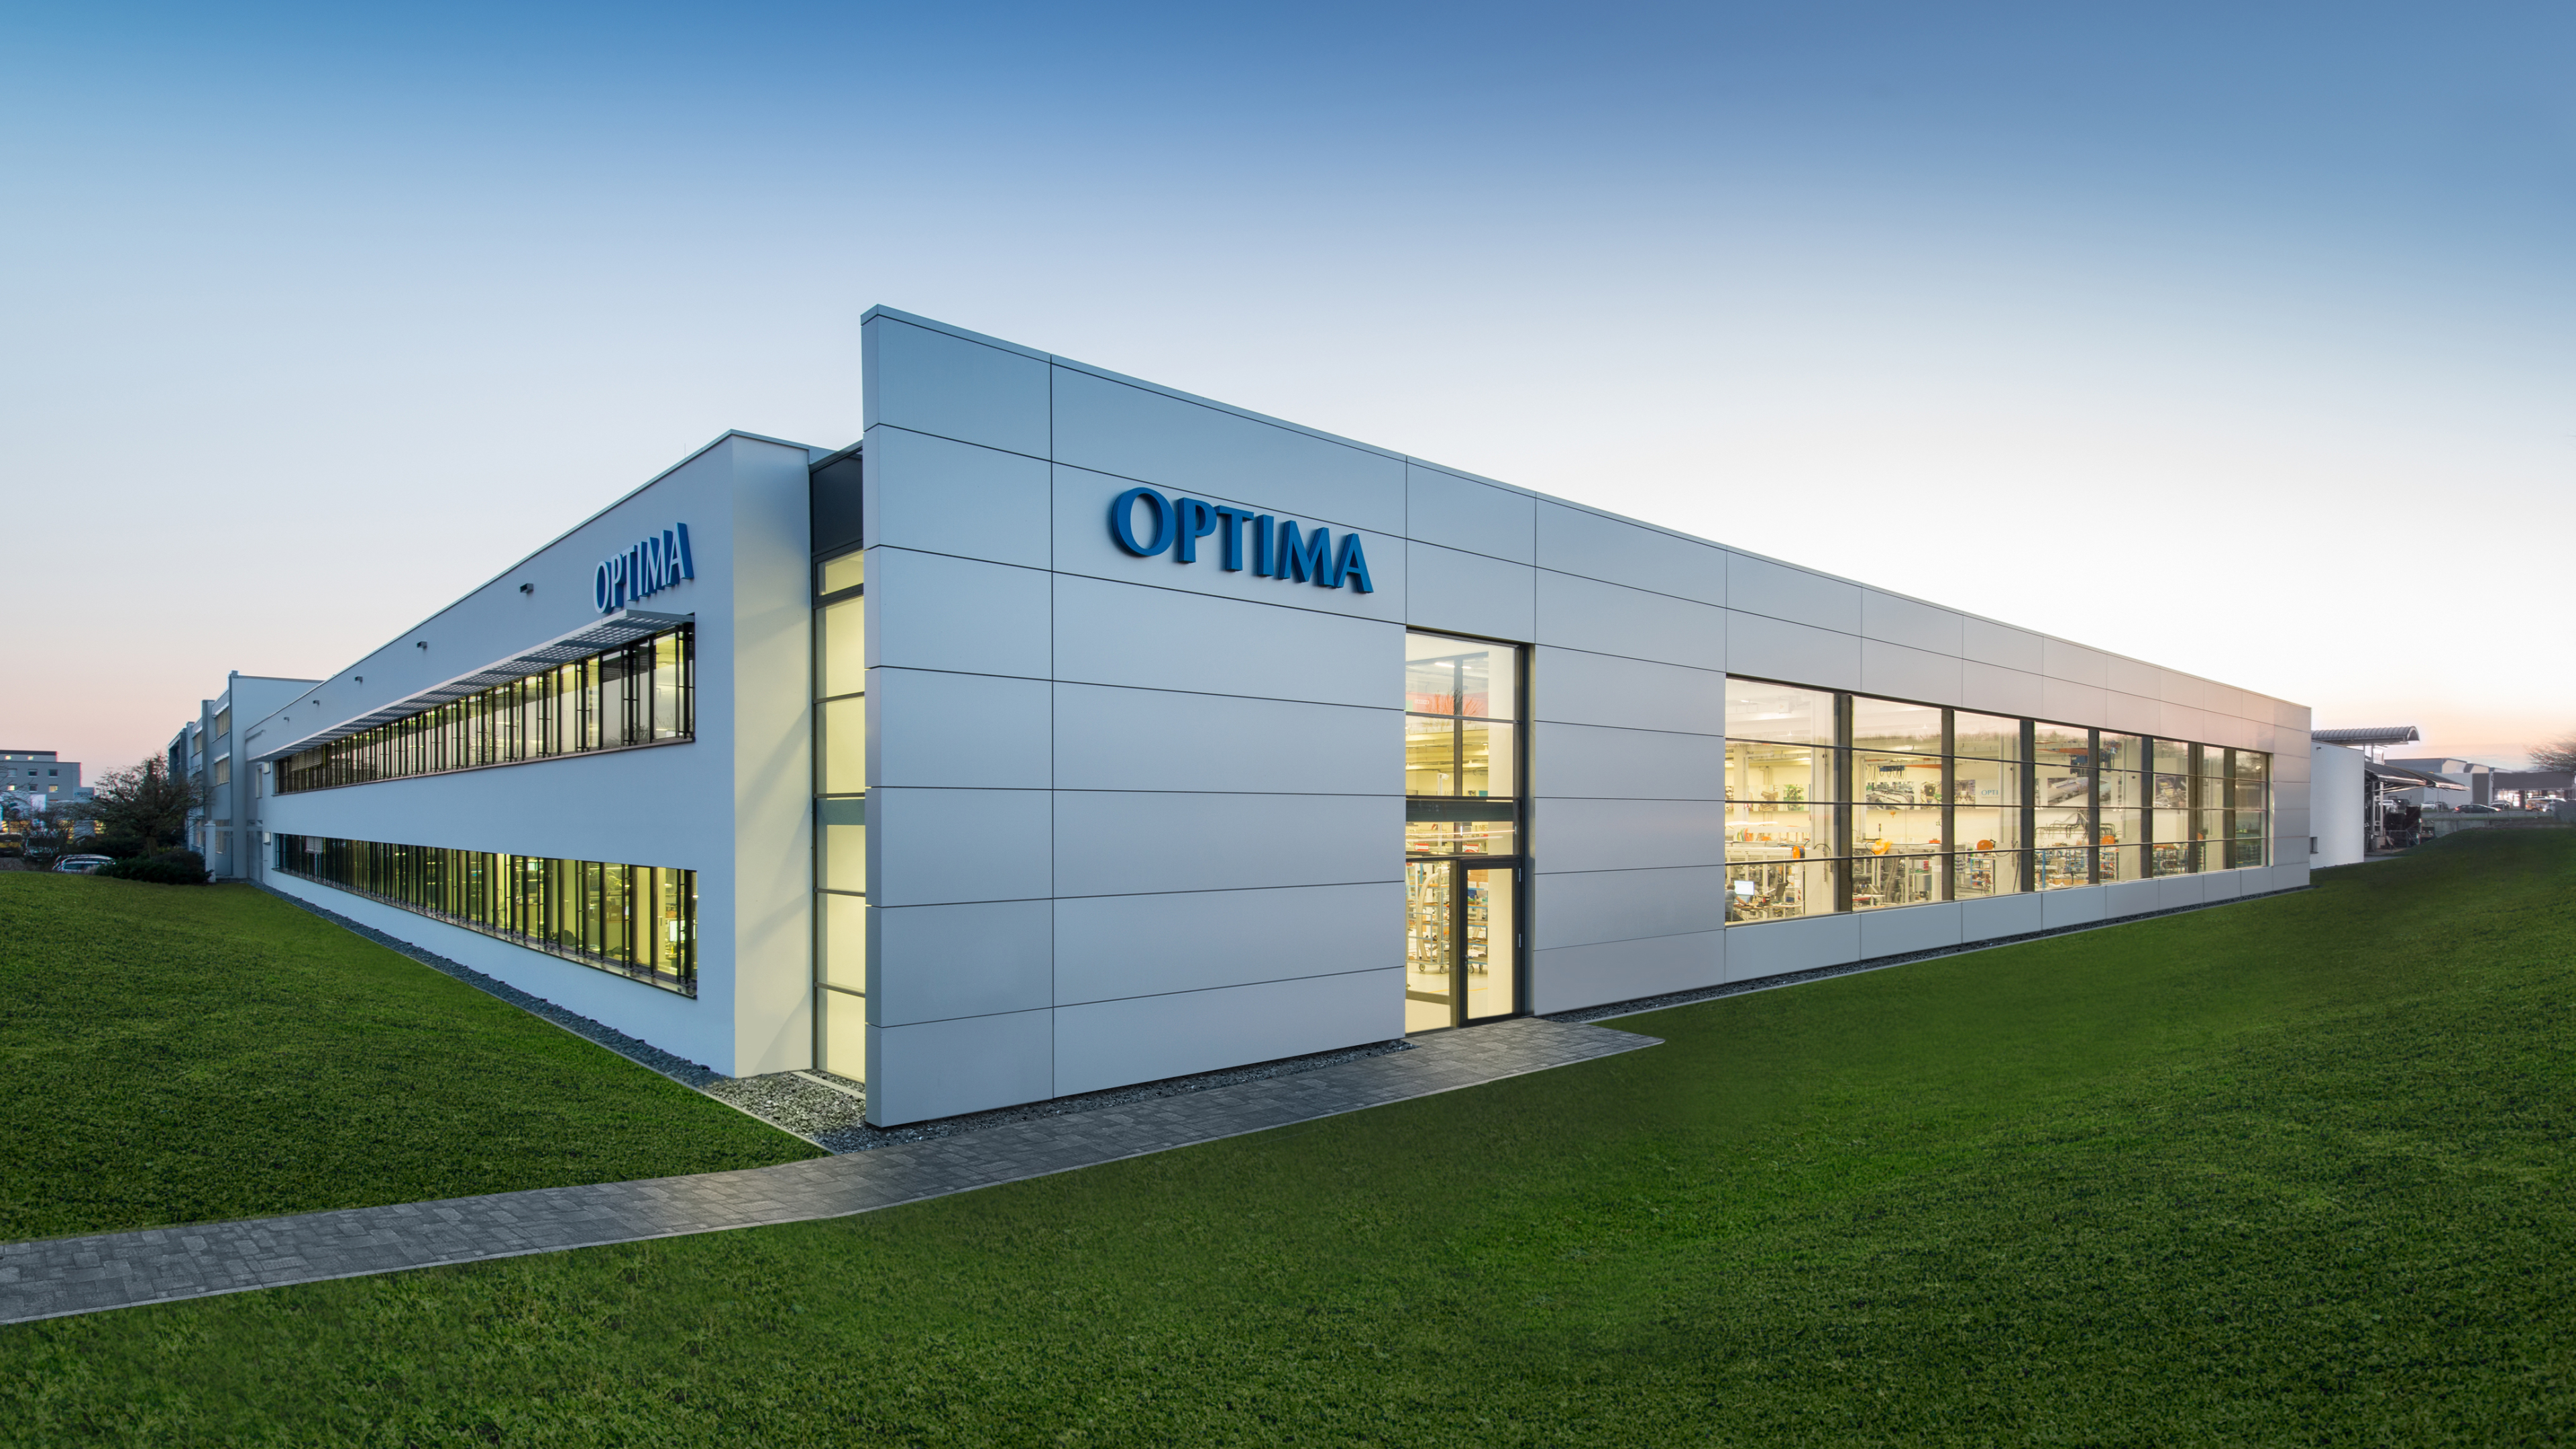 Headquarters of OPTIMA packaging group GmbH in Schwäbisch Hall, Germany